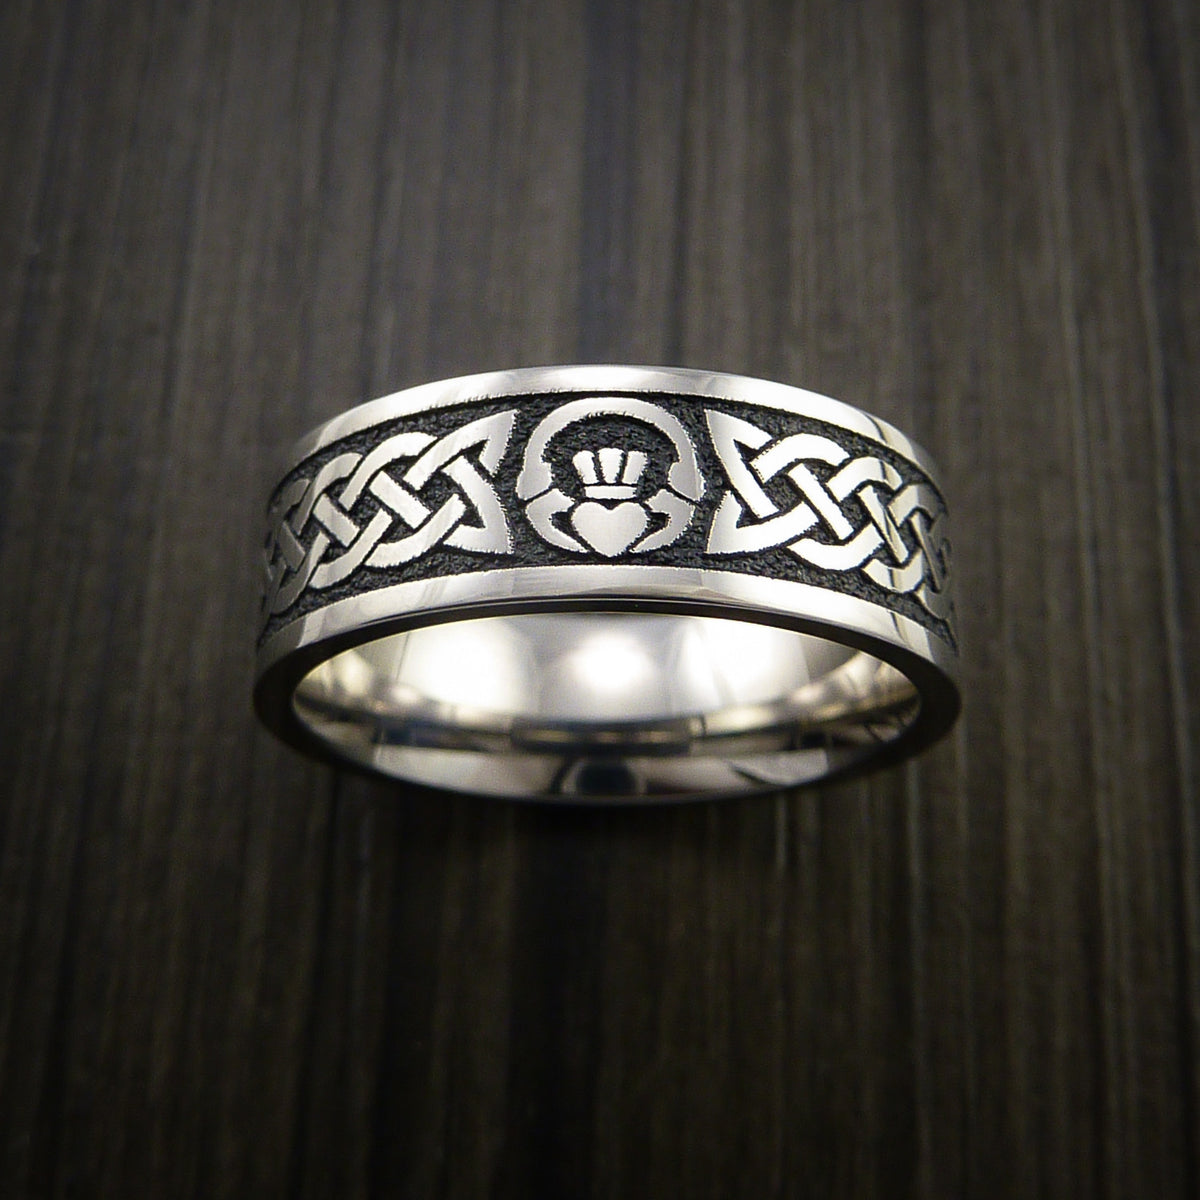 Titanium Celtic Irish Claddagh Men's Ring Carved Hands Clasping Heart ...